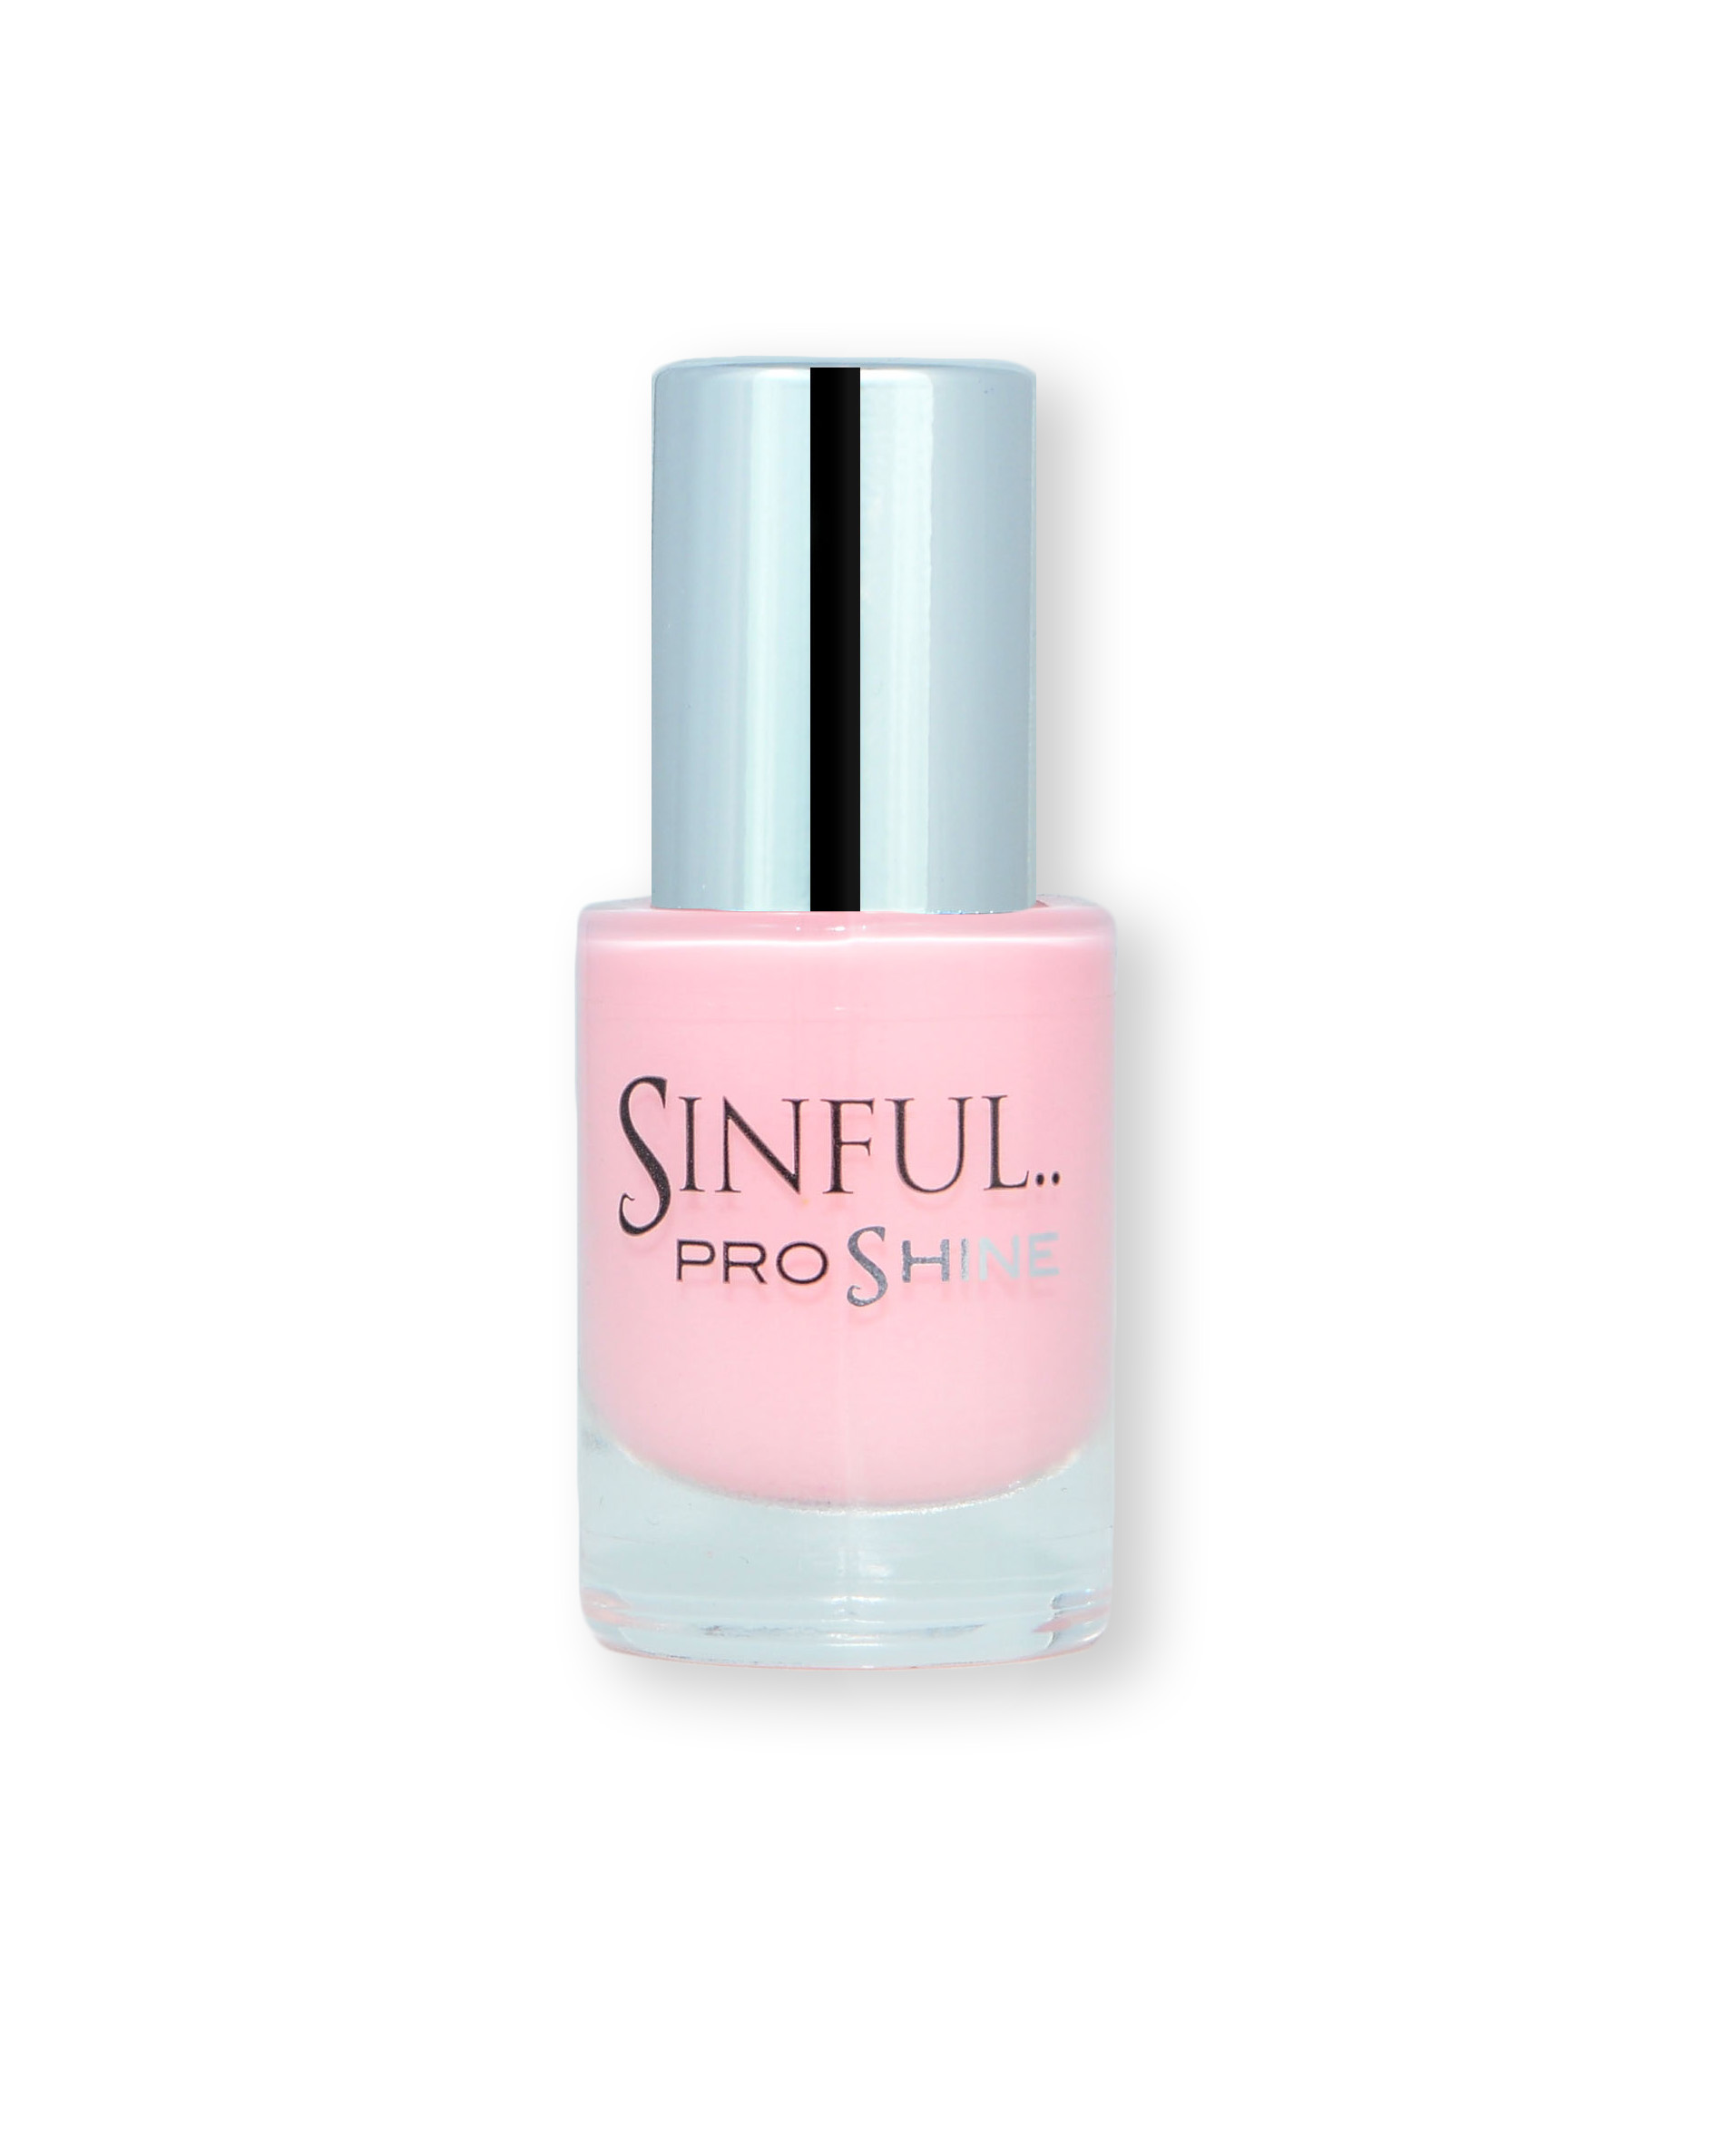 Sinful PROshine is a revolution into top spec imitation gel-like formula, easy application, full coverage and a sleek finish.